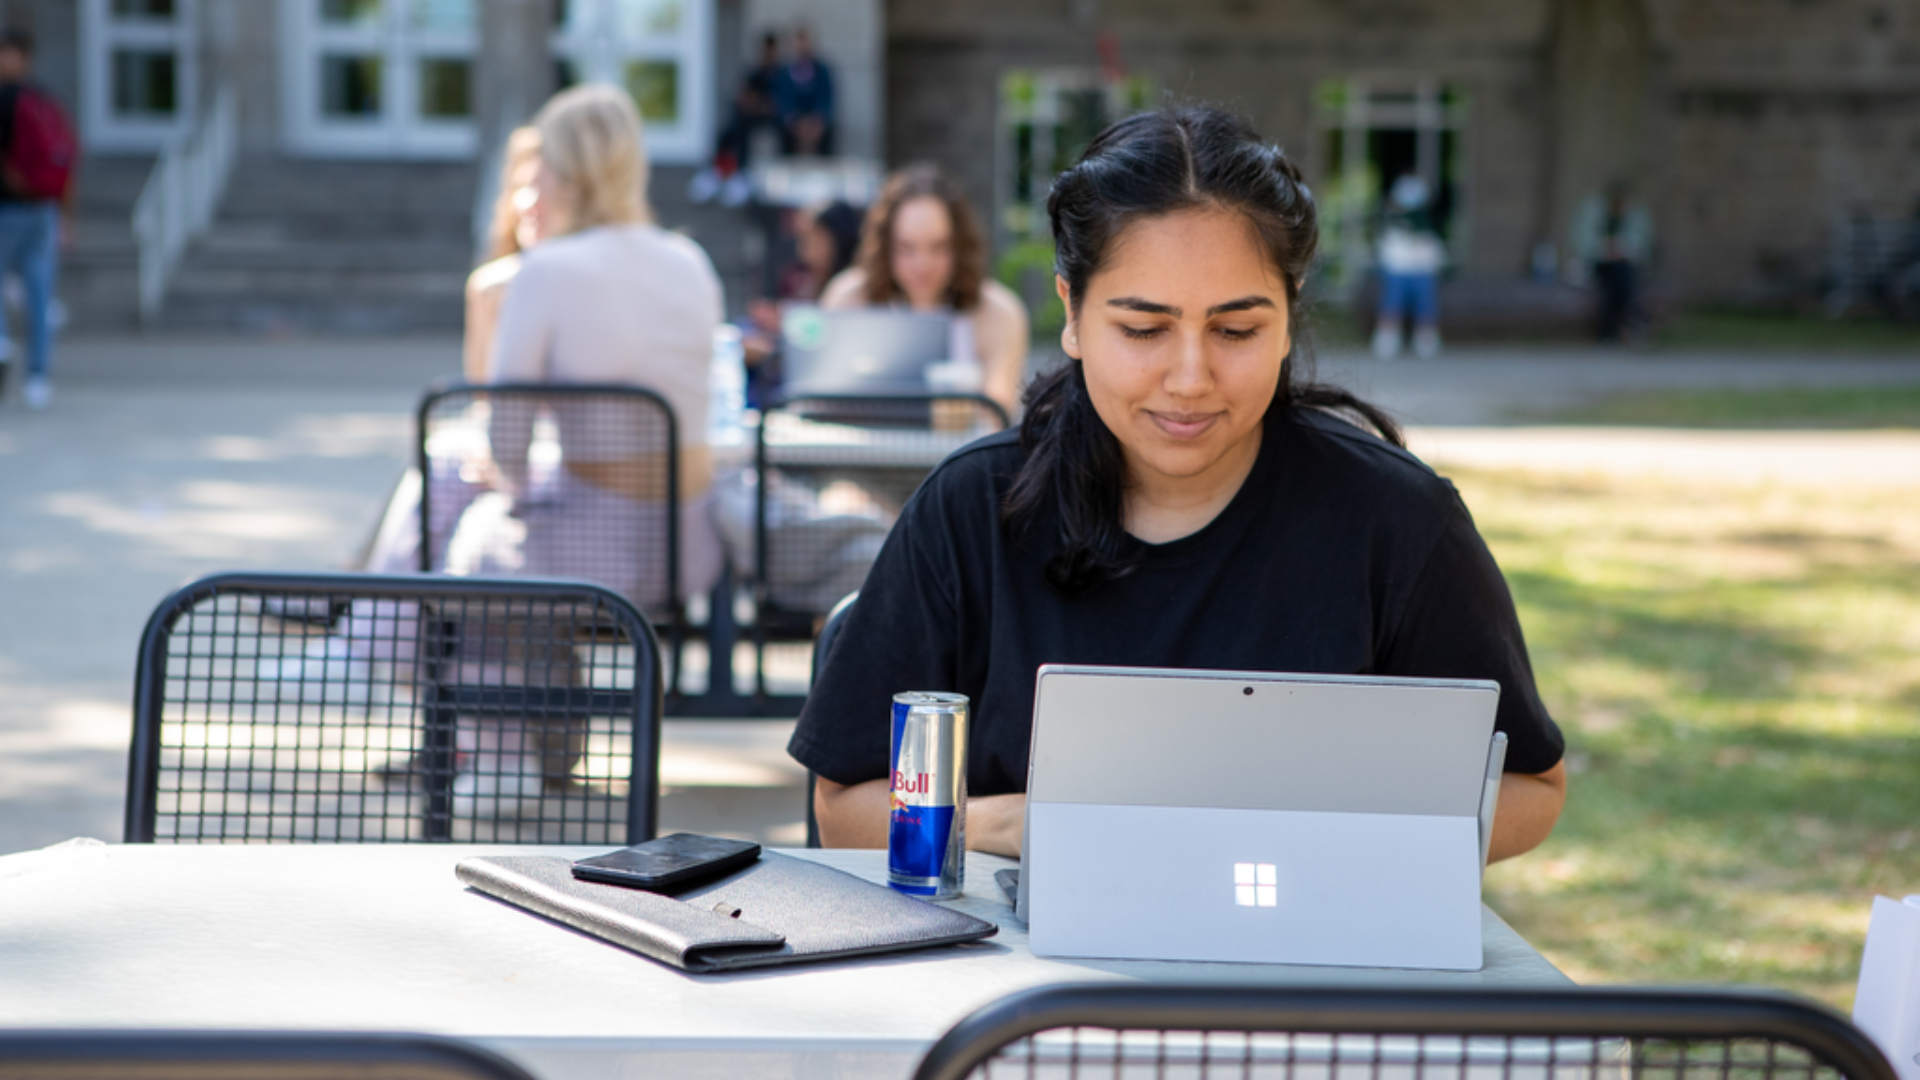 A student seated outdoors looking at their open laptop